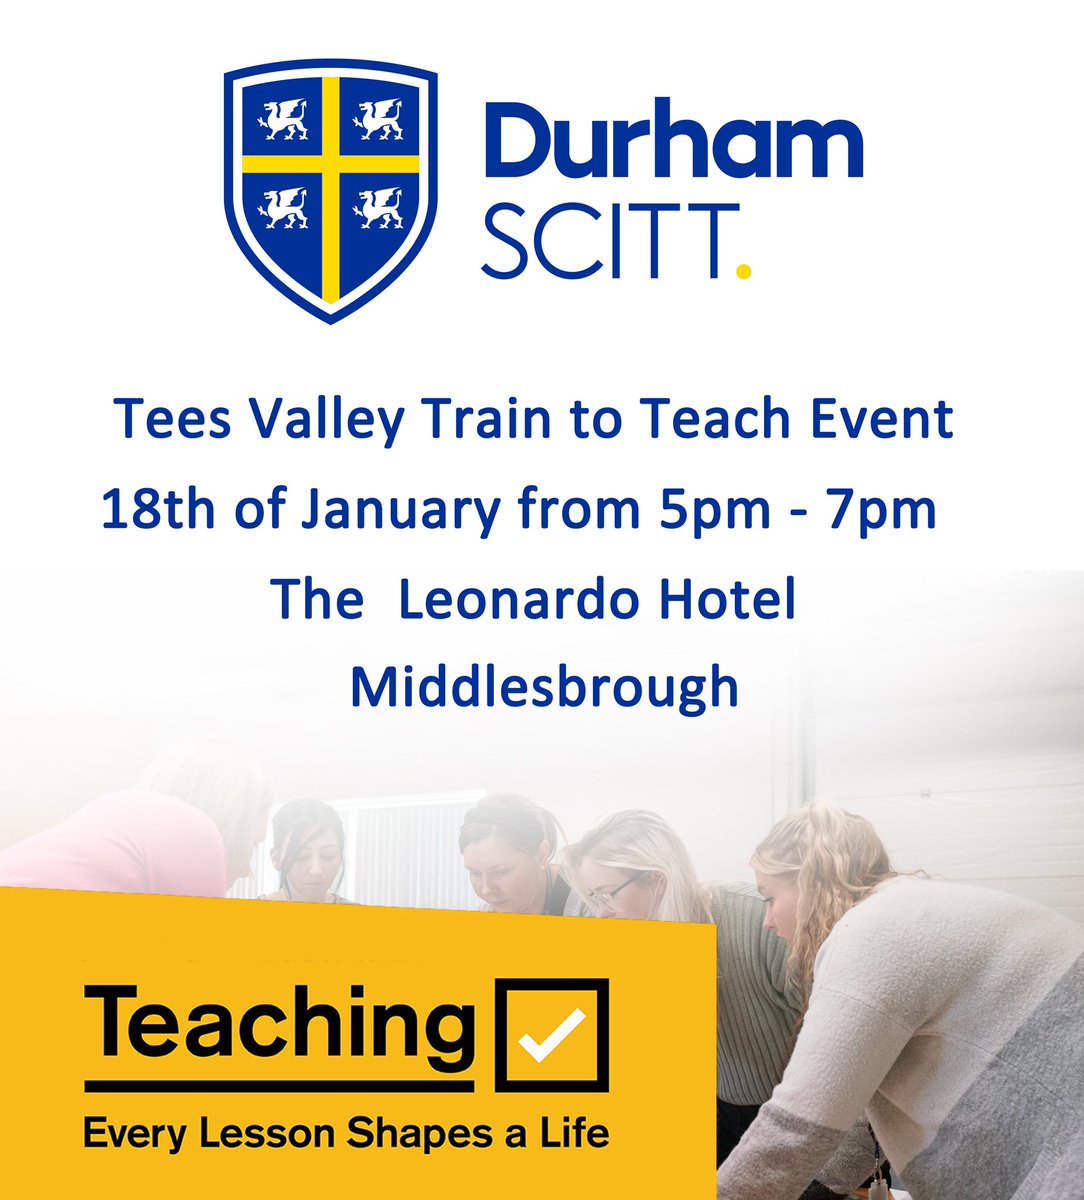 Join us at the Tees Valley Train to Teach event on Thursday 18th of January. Find out more about the courses we offer and how Durham SCITT can support you during the training year.